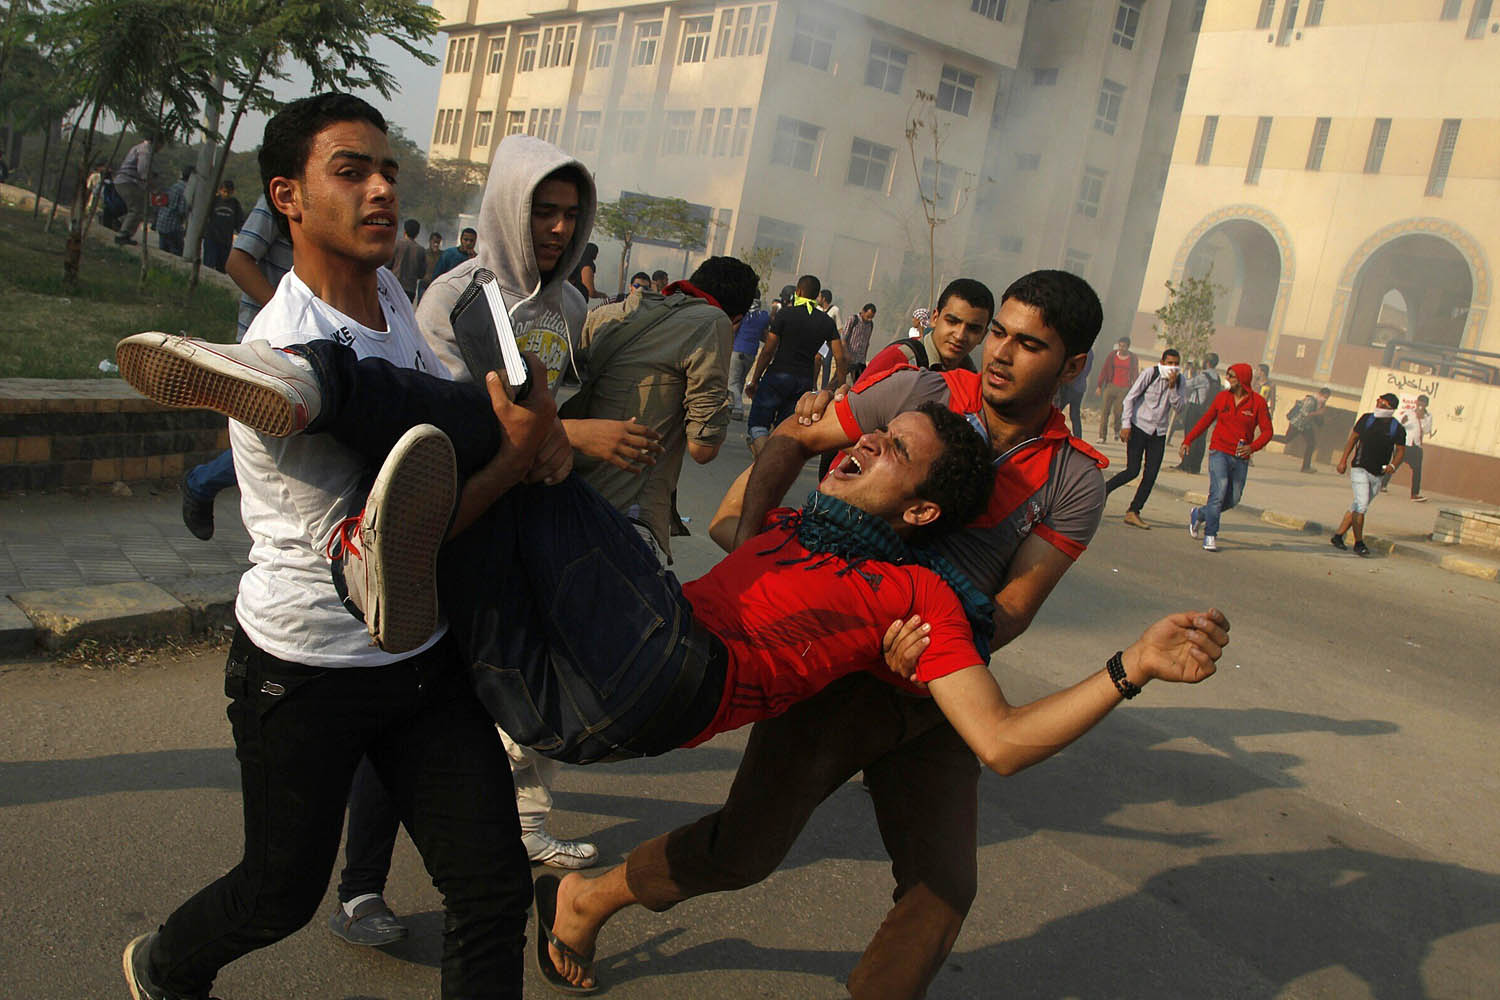 Oct. 28, 2013. Student supporters of ousted president Mohamed Morsi and the Muslim brotherhood carry a comrade injured during clashes with Egyptian security forces outside al-Azhar university in Cairo, Egypt.